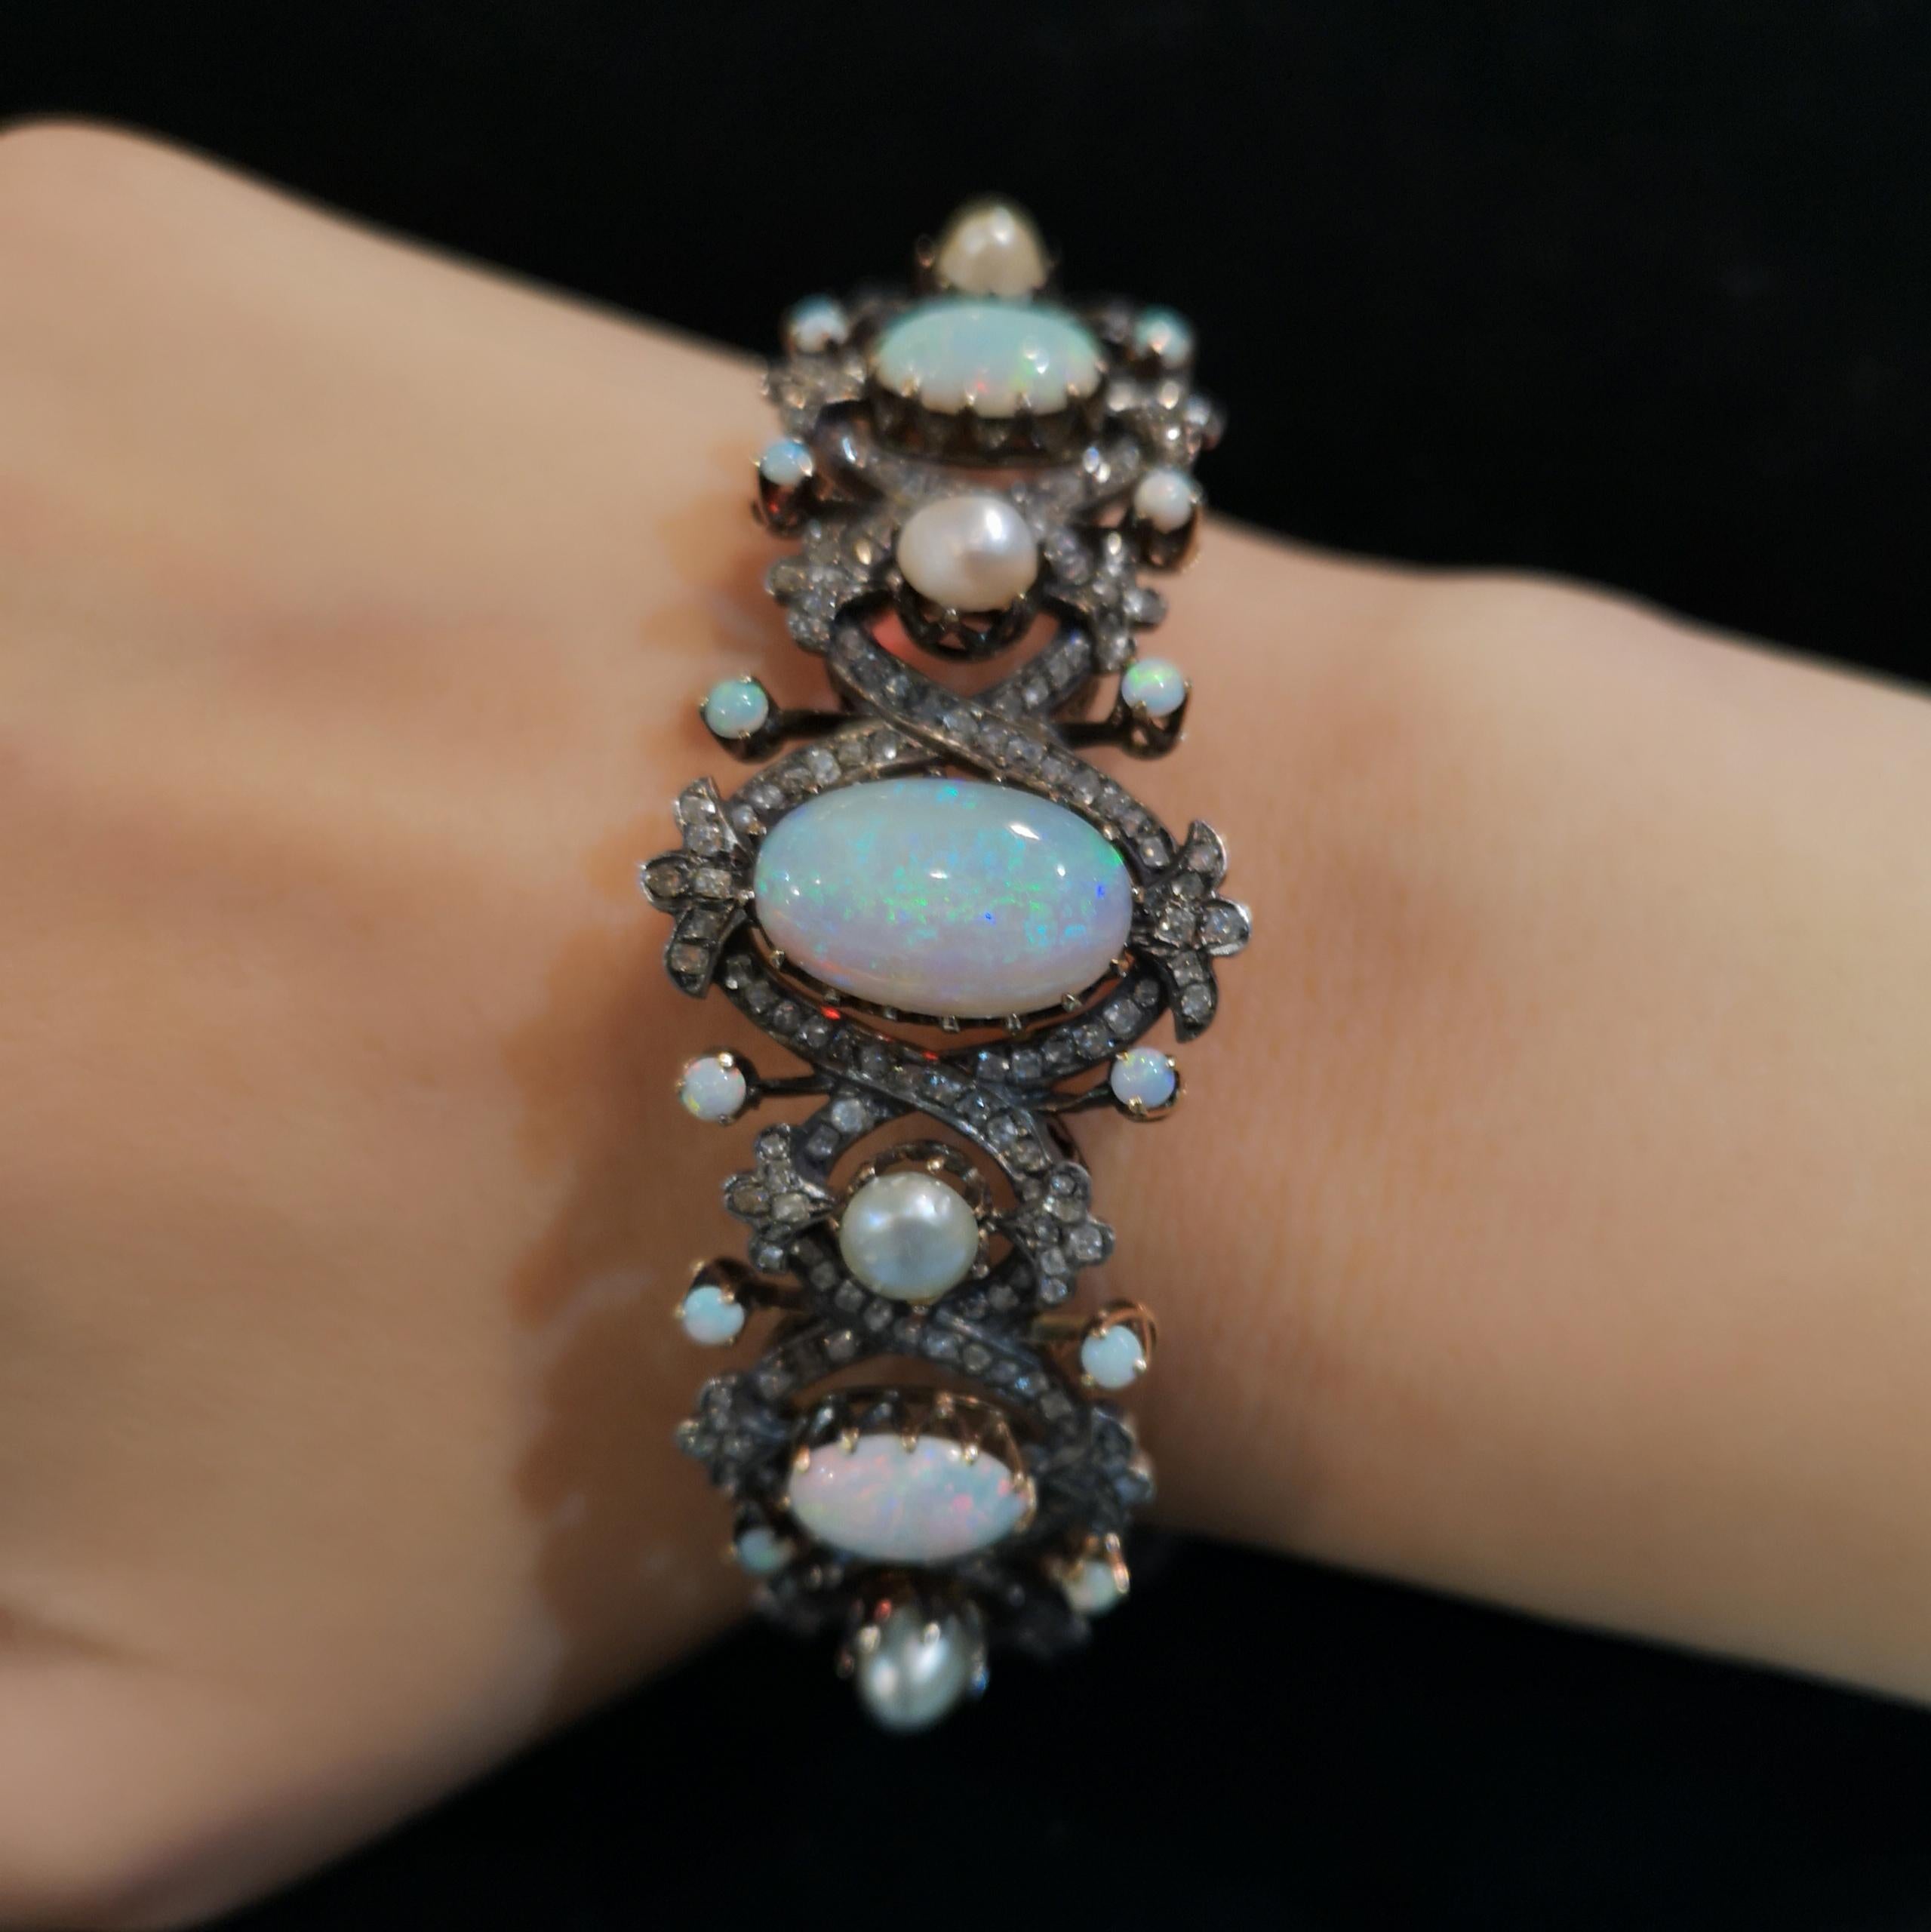 An opal, pearl and diamond bangle, set with three oval, cabochon cut opals, measuring 10 x 7.3mm, 15.2 x 9.3mm and 10.1 x 6.3mm, with four 5-5.5mm natural bouton pearls, surrounded by old-cut diamonds in a crossing over pavé style setting, with